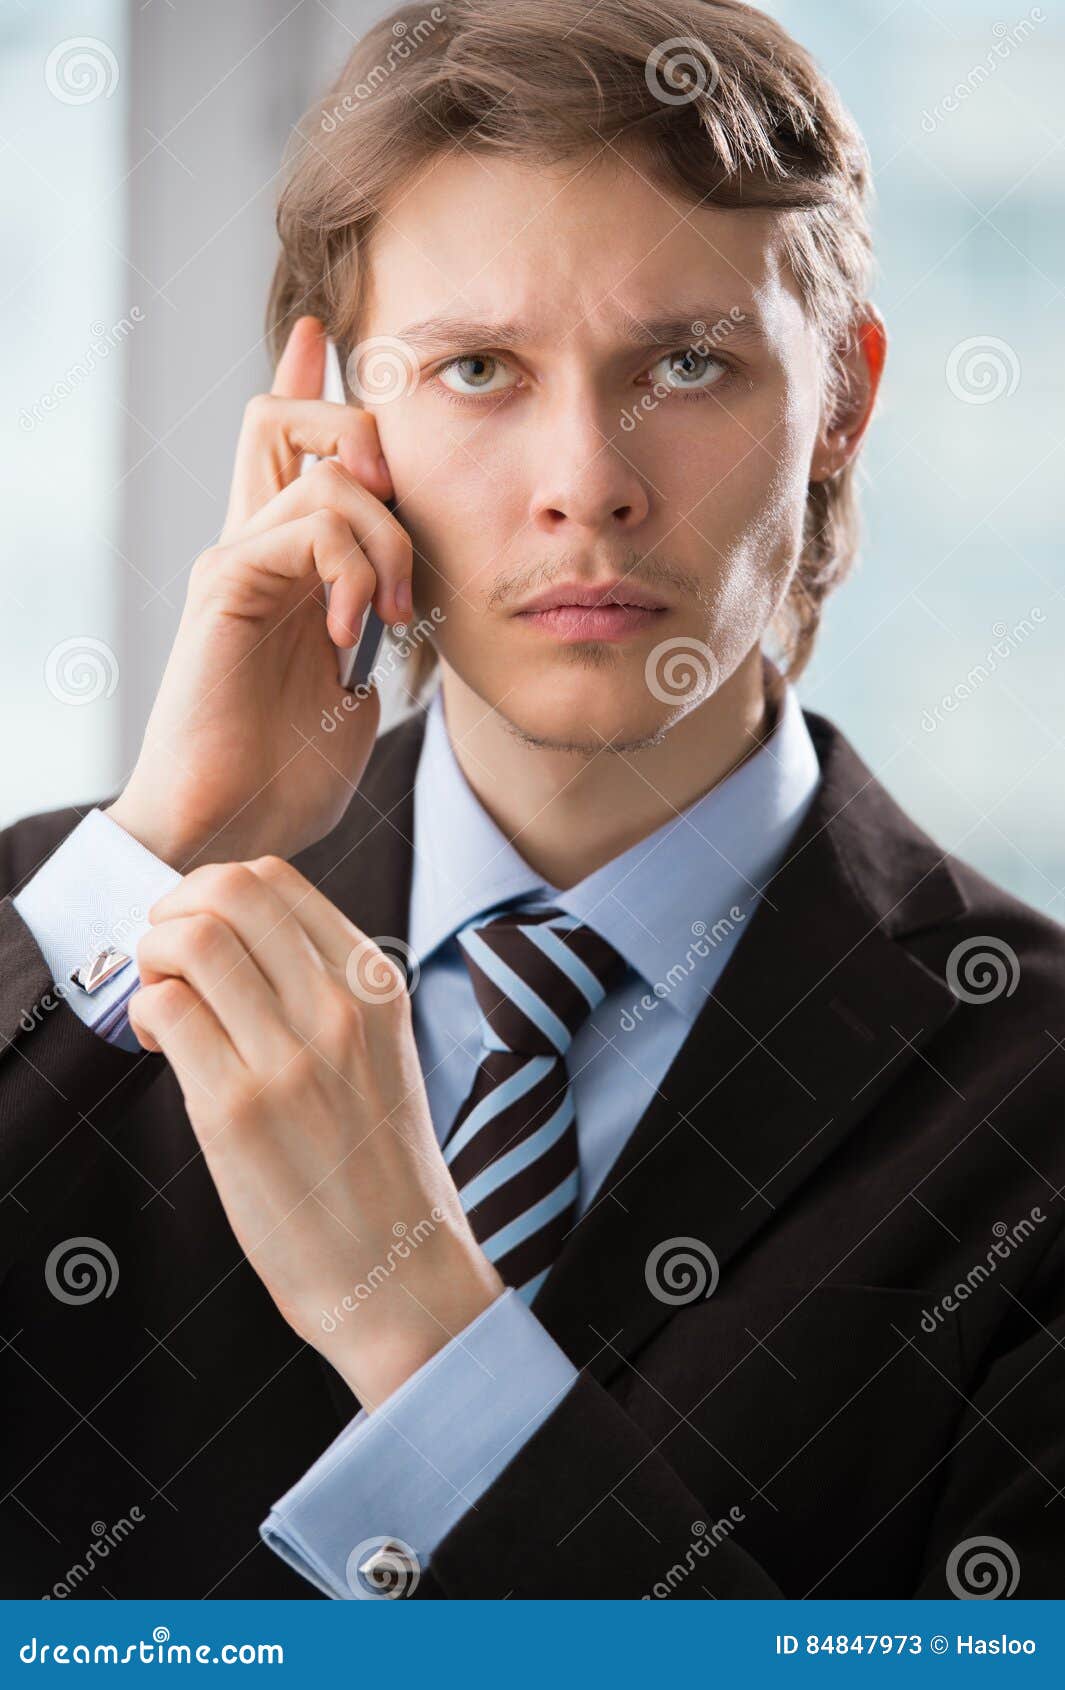 Handsome Business Man Using Cell Phone Stock Image - Image of people